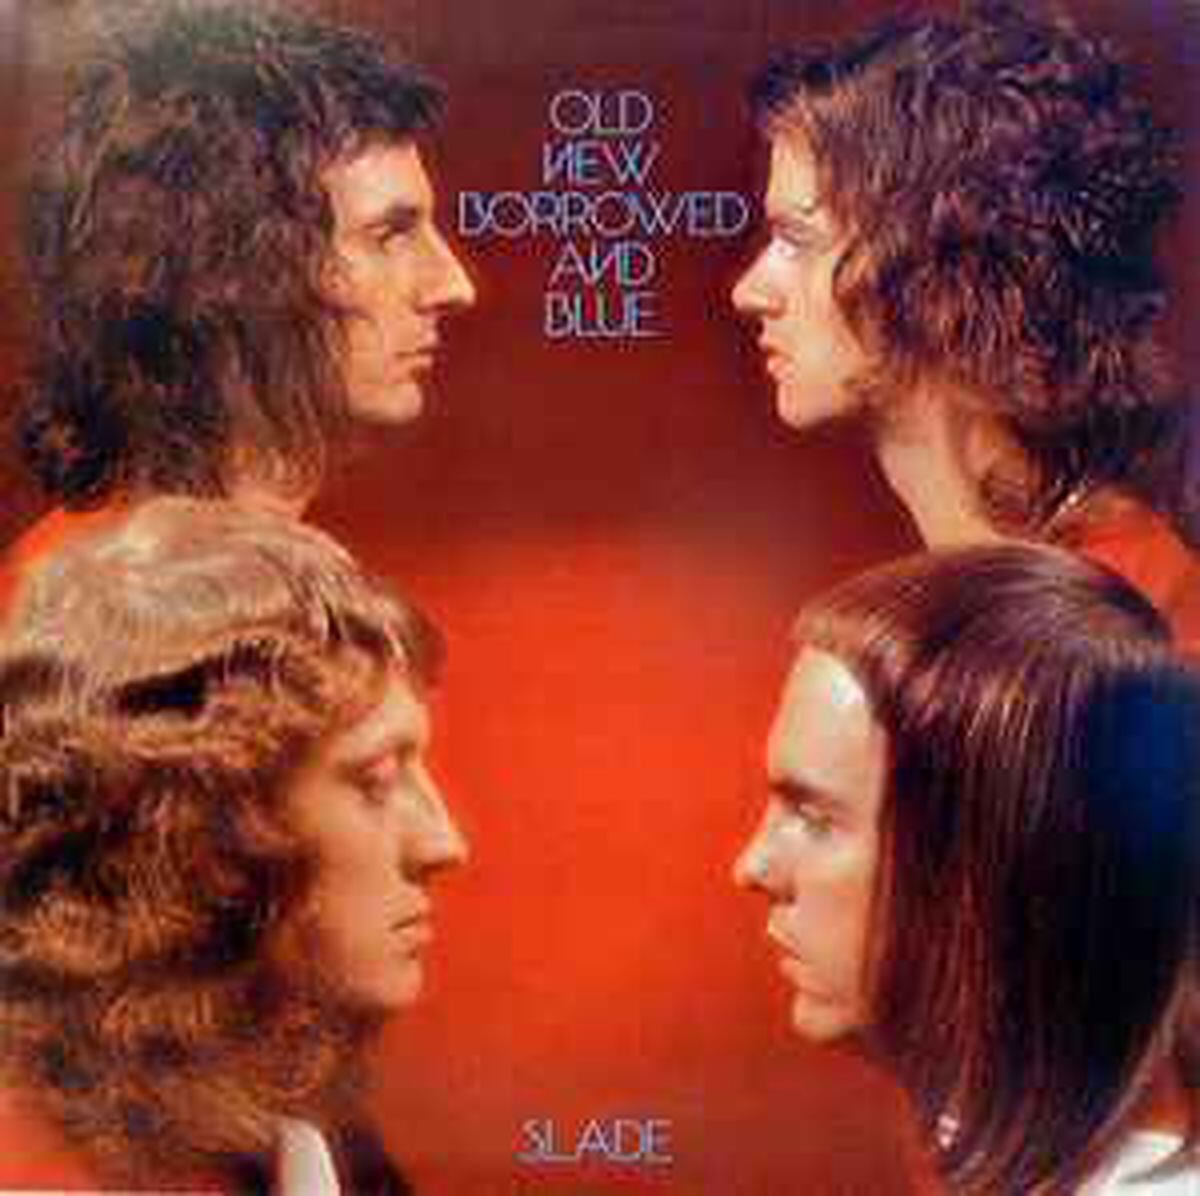 Slade - Old, New, Borrowed and Blue Album Cover